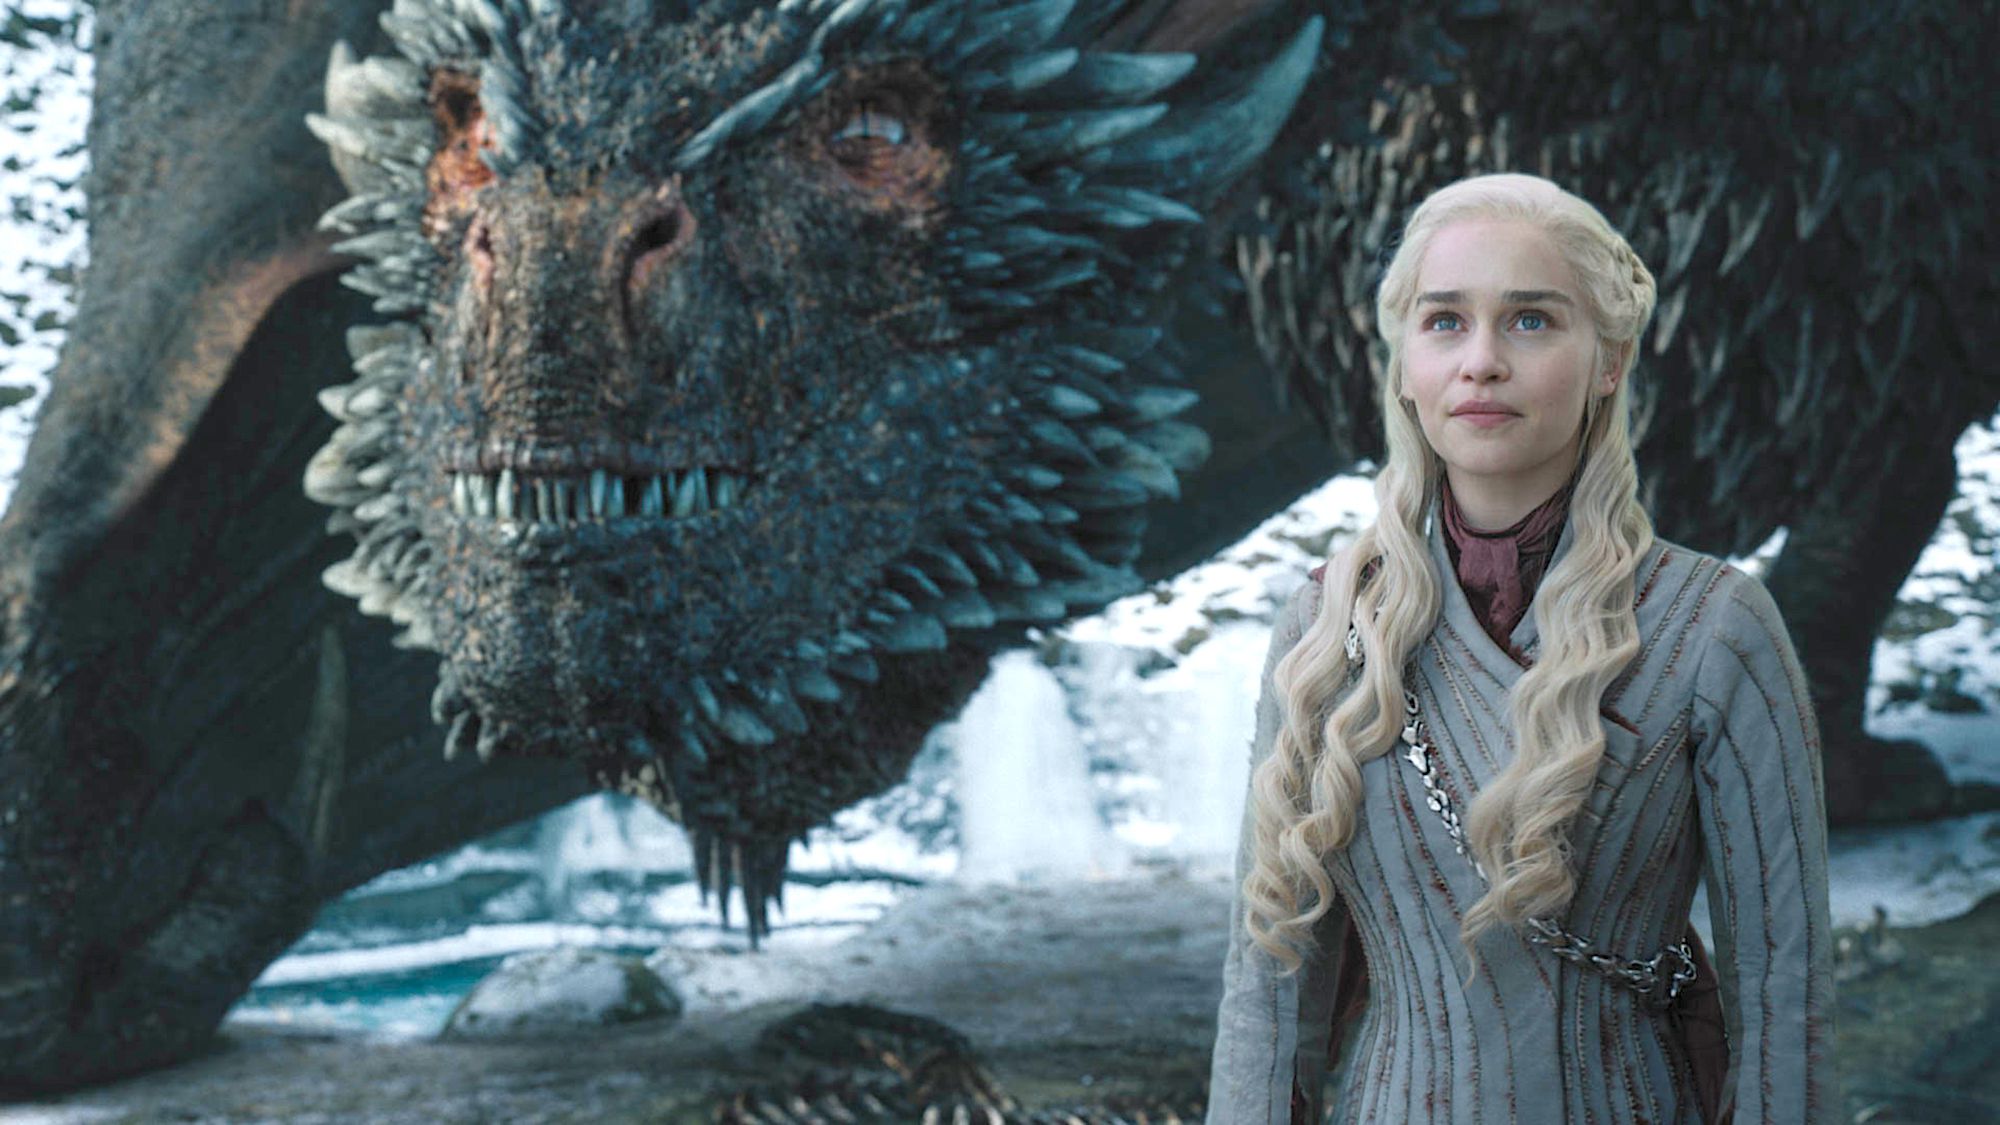 ⚔️ Everyone Has a Role to Play in “Game of Thrones” — What’s Yours? daenerys drogon dragon